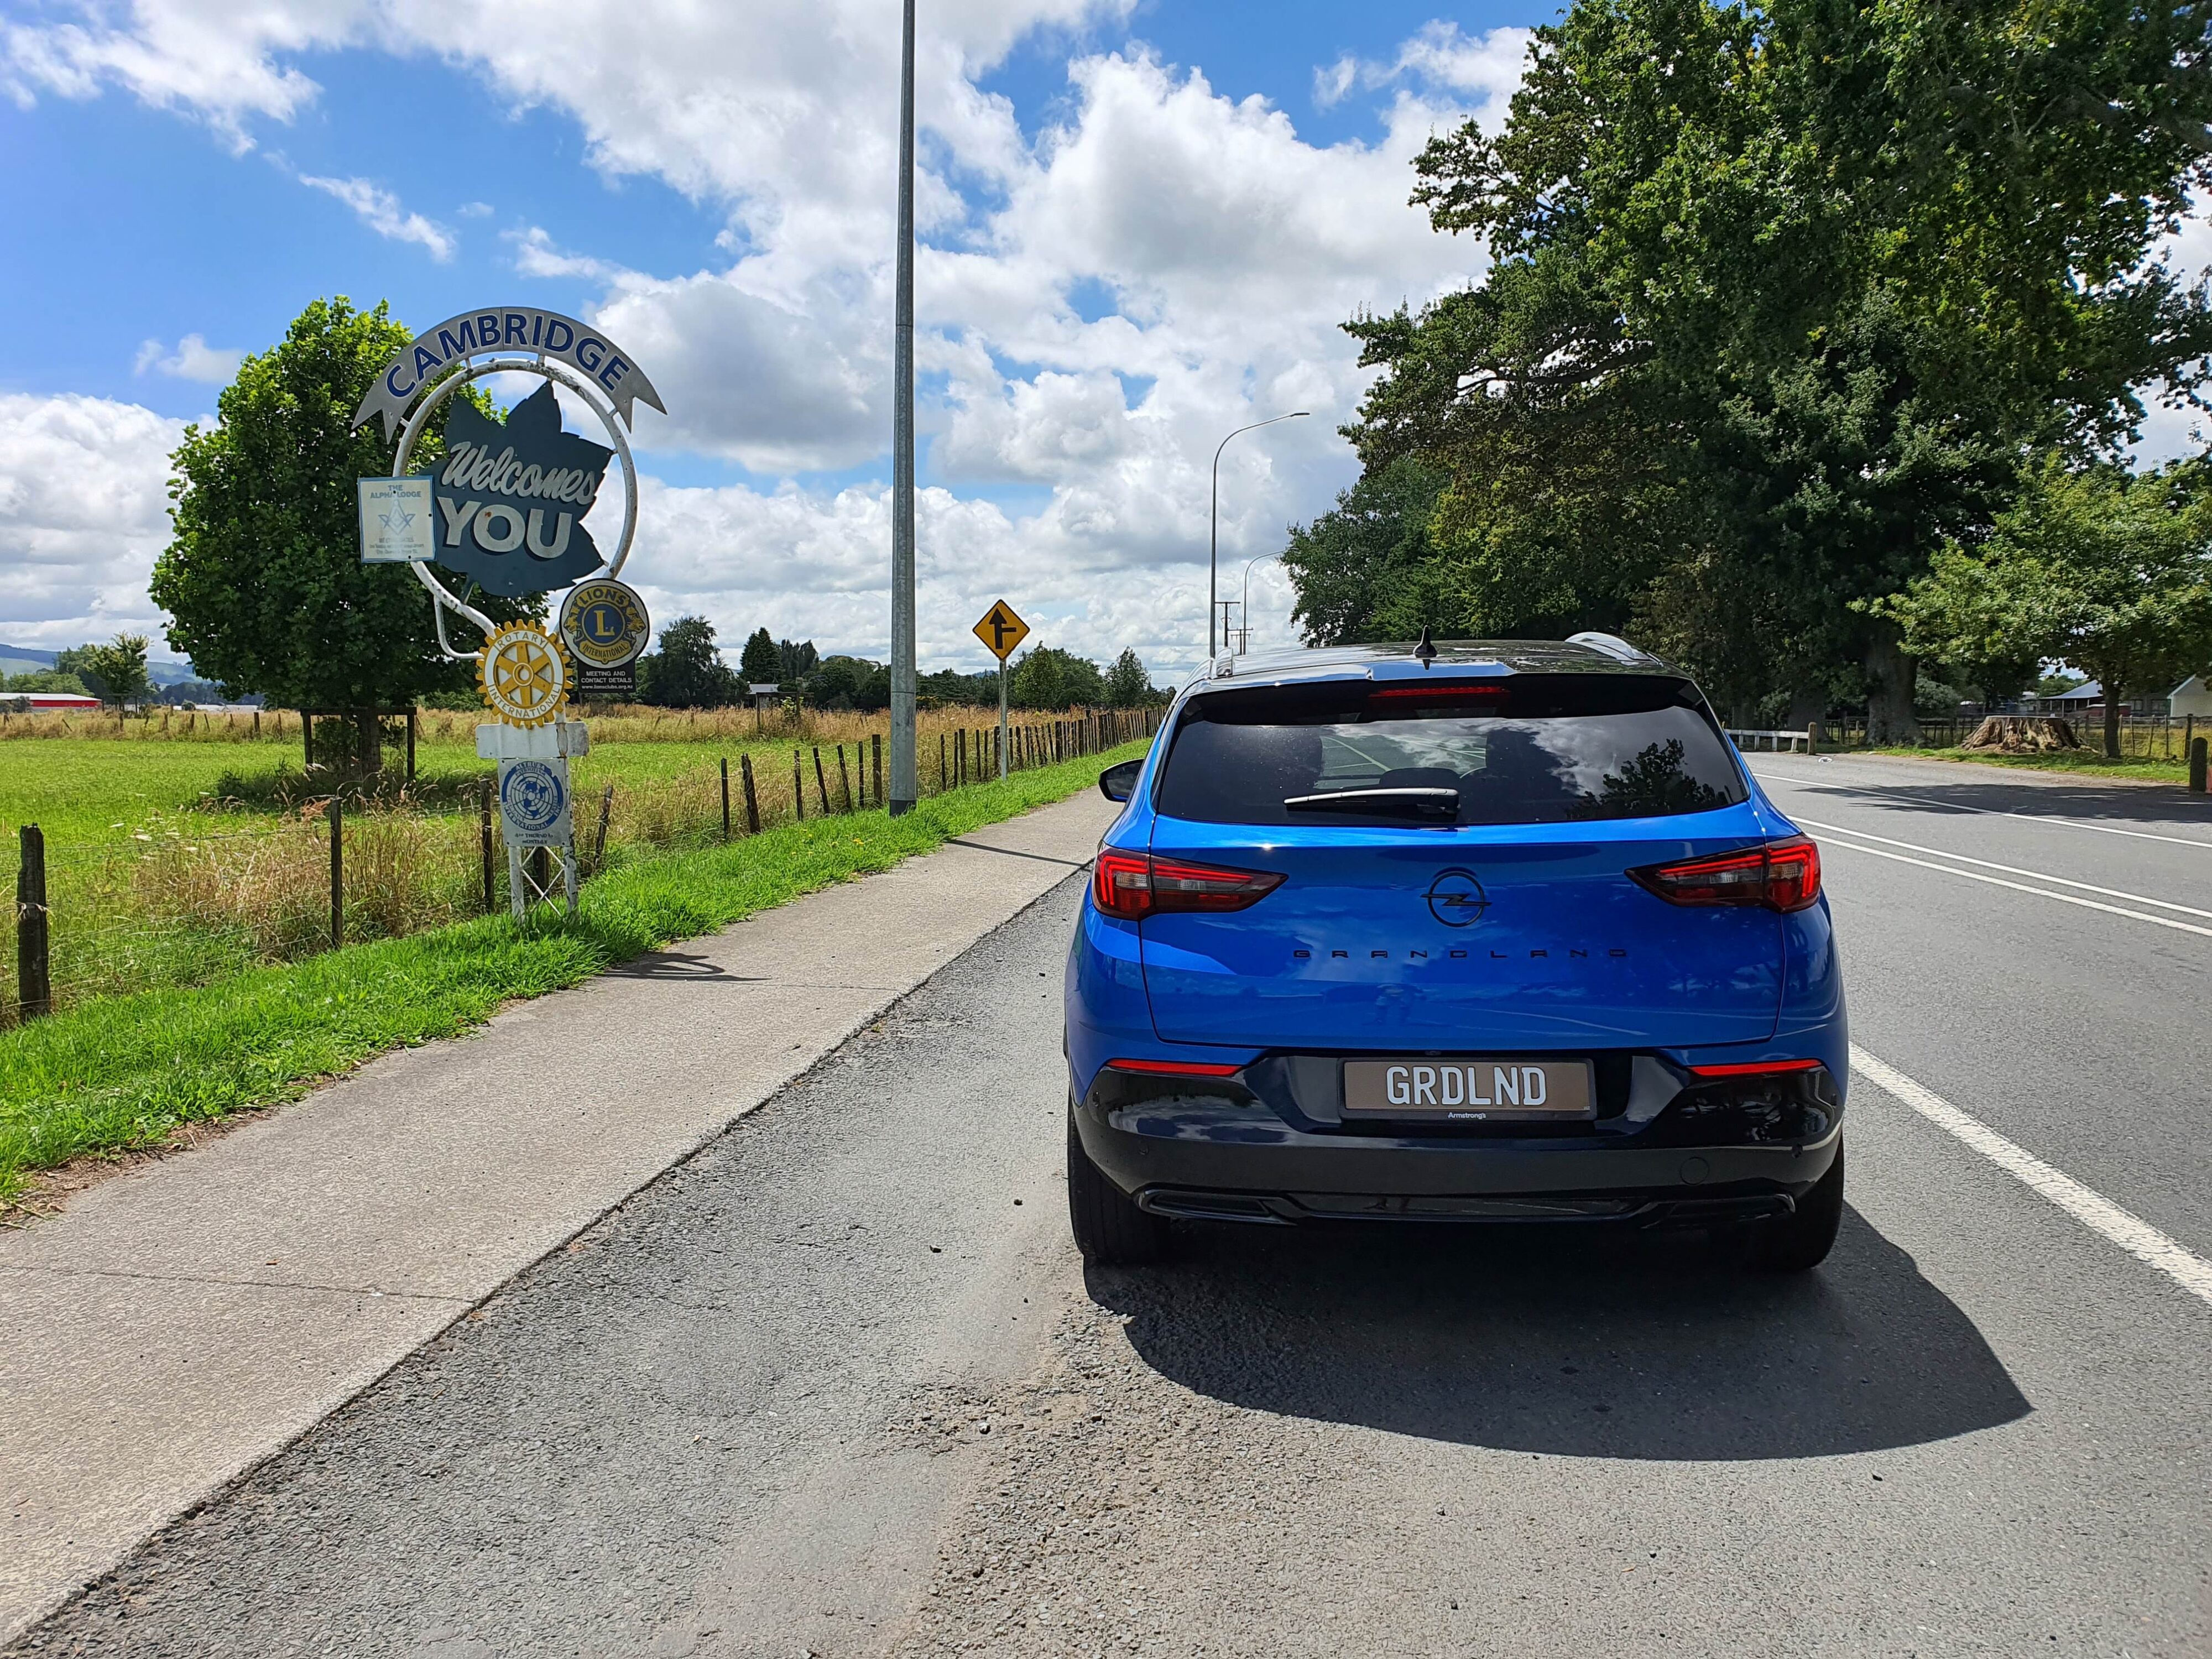 Photo of a Cobalt Blue Opel Grandland SRi with a sign signifying Cambridge Town, Waikato, New Zealand.